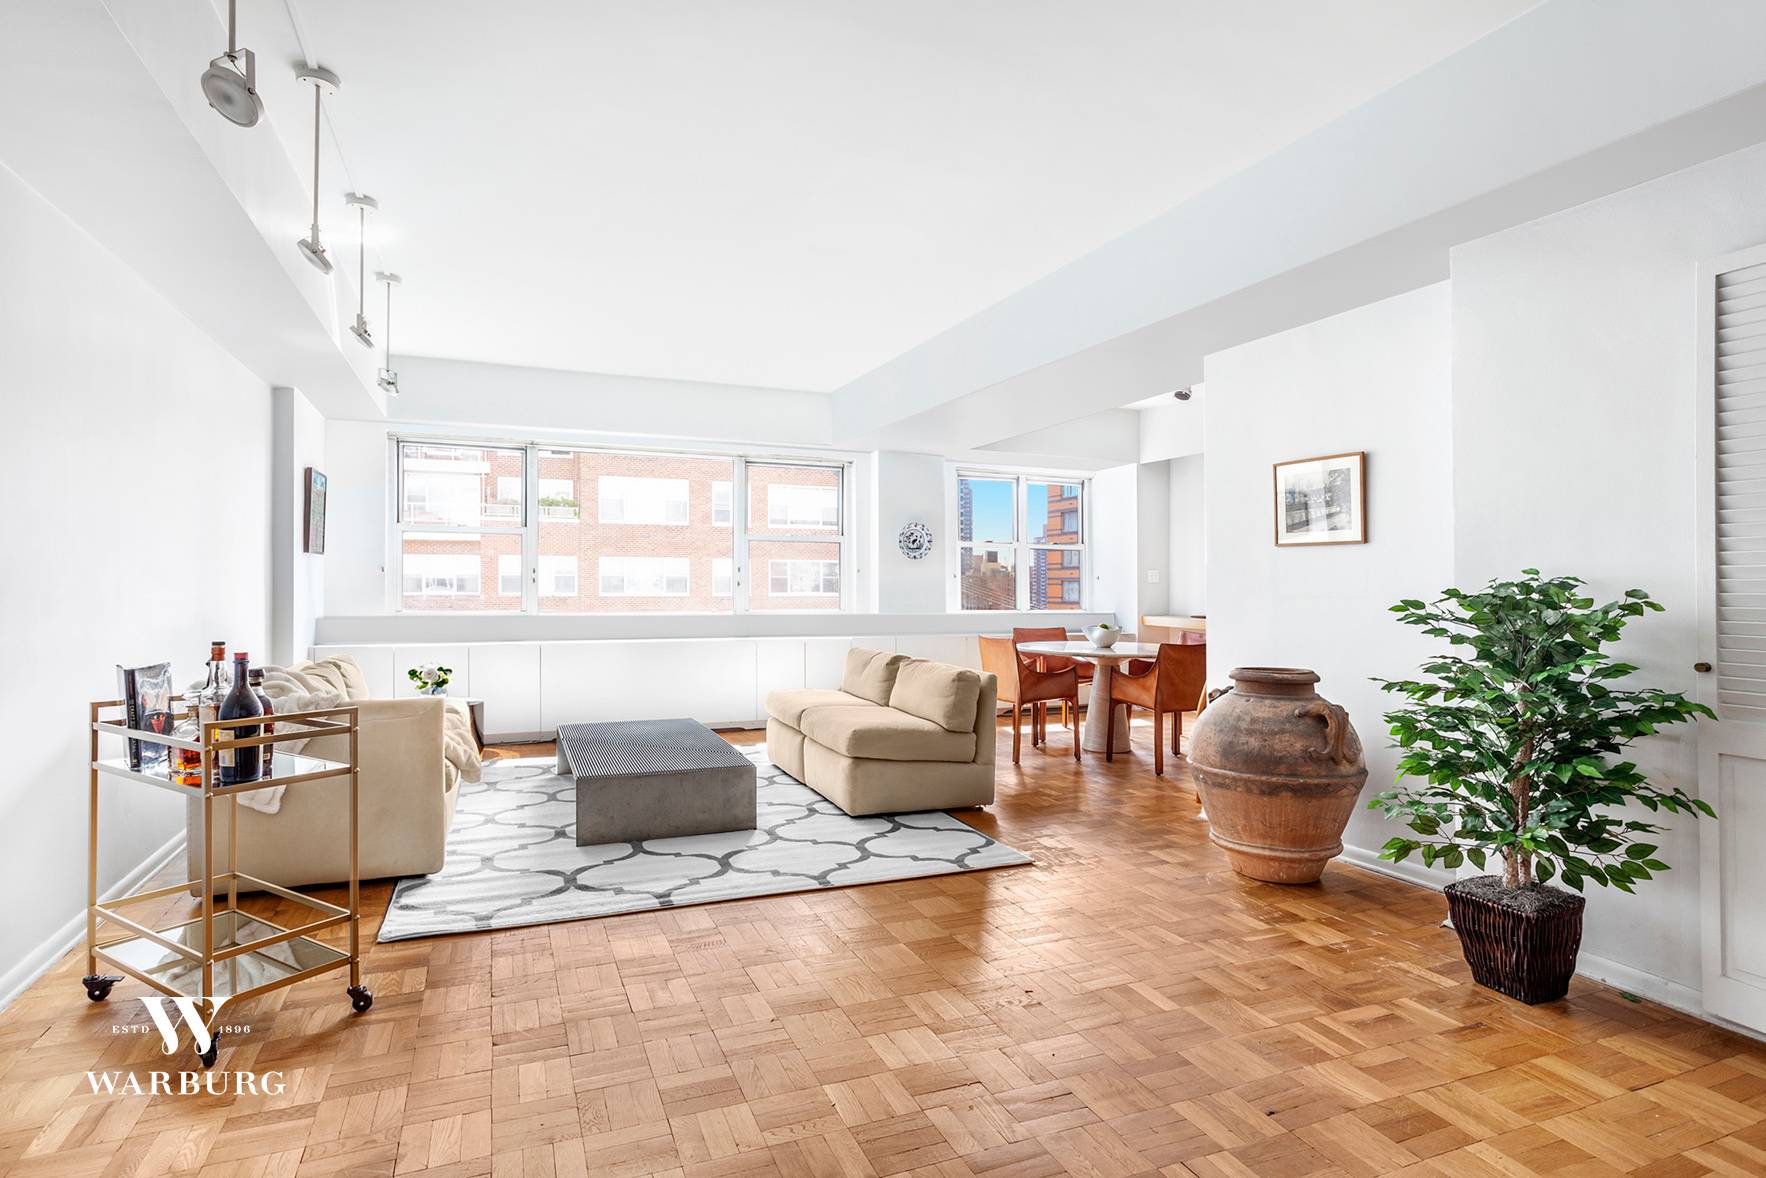 Apartment 15B at The Victorian, a highly sought after white glove cooperative on the Upper East Side, is a sprawling, bright, oversized one bedroom, one and a half bathroom home ...